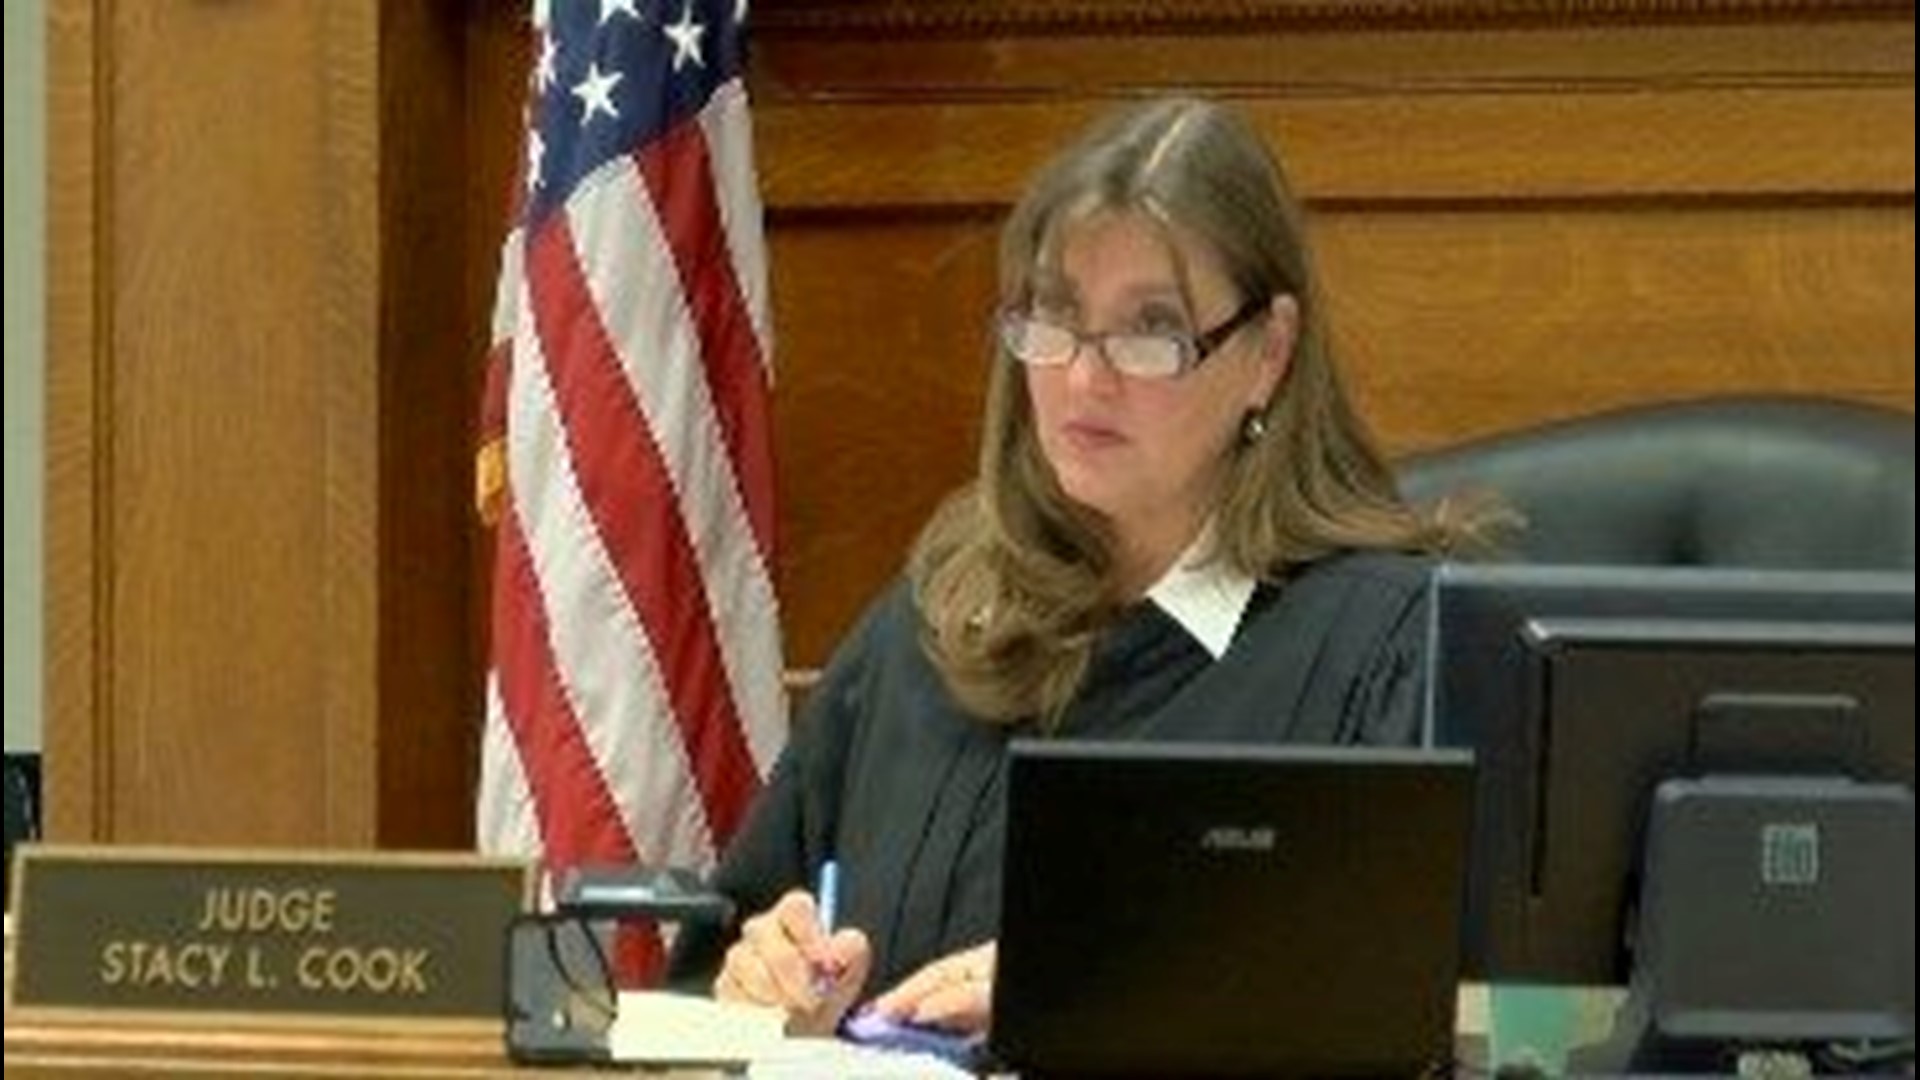 RAW: Judge sentences Ray Abou Arab to 20 years in prison